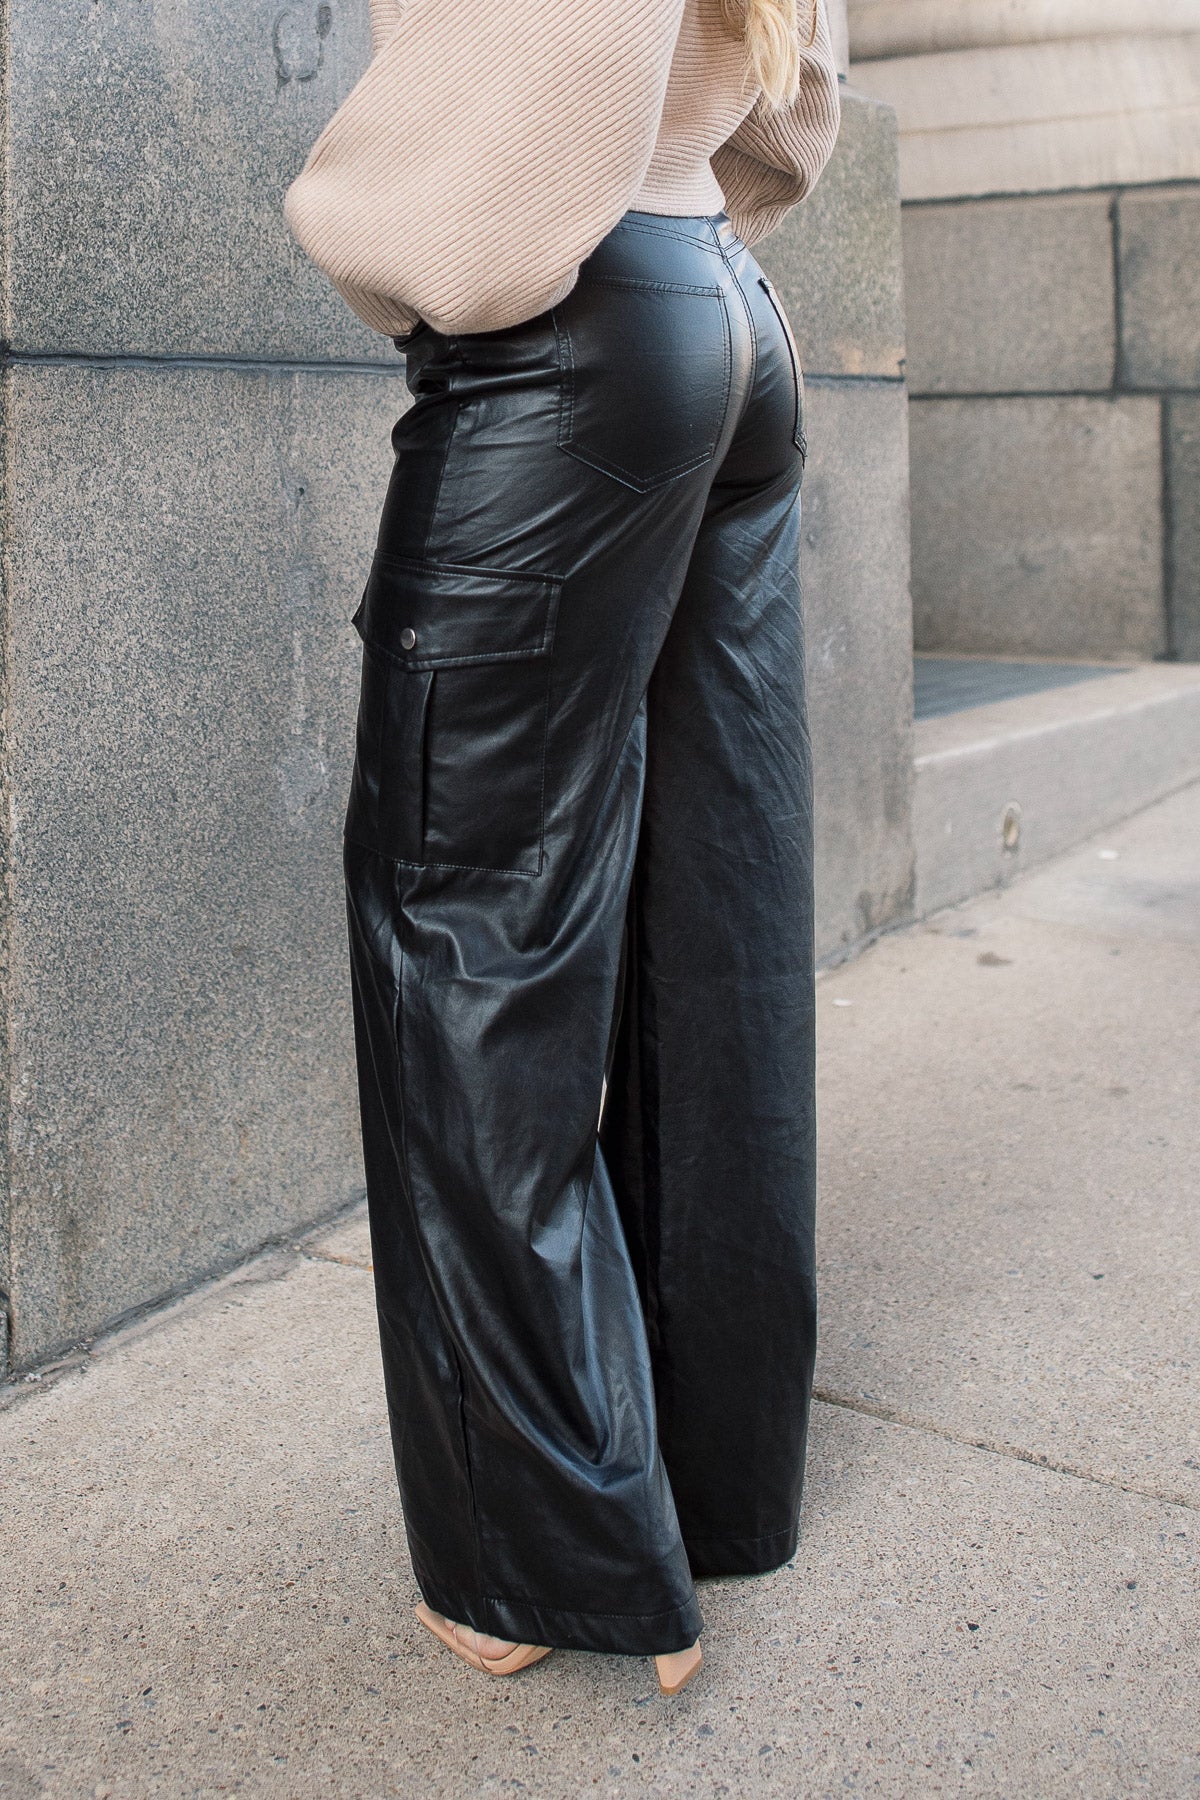 Stylish Black Faux Leather Pants - All Bottoms